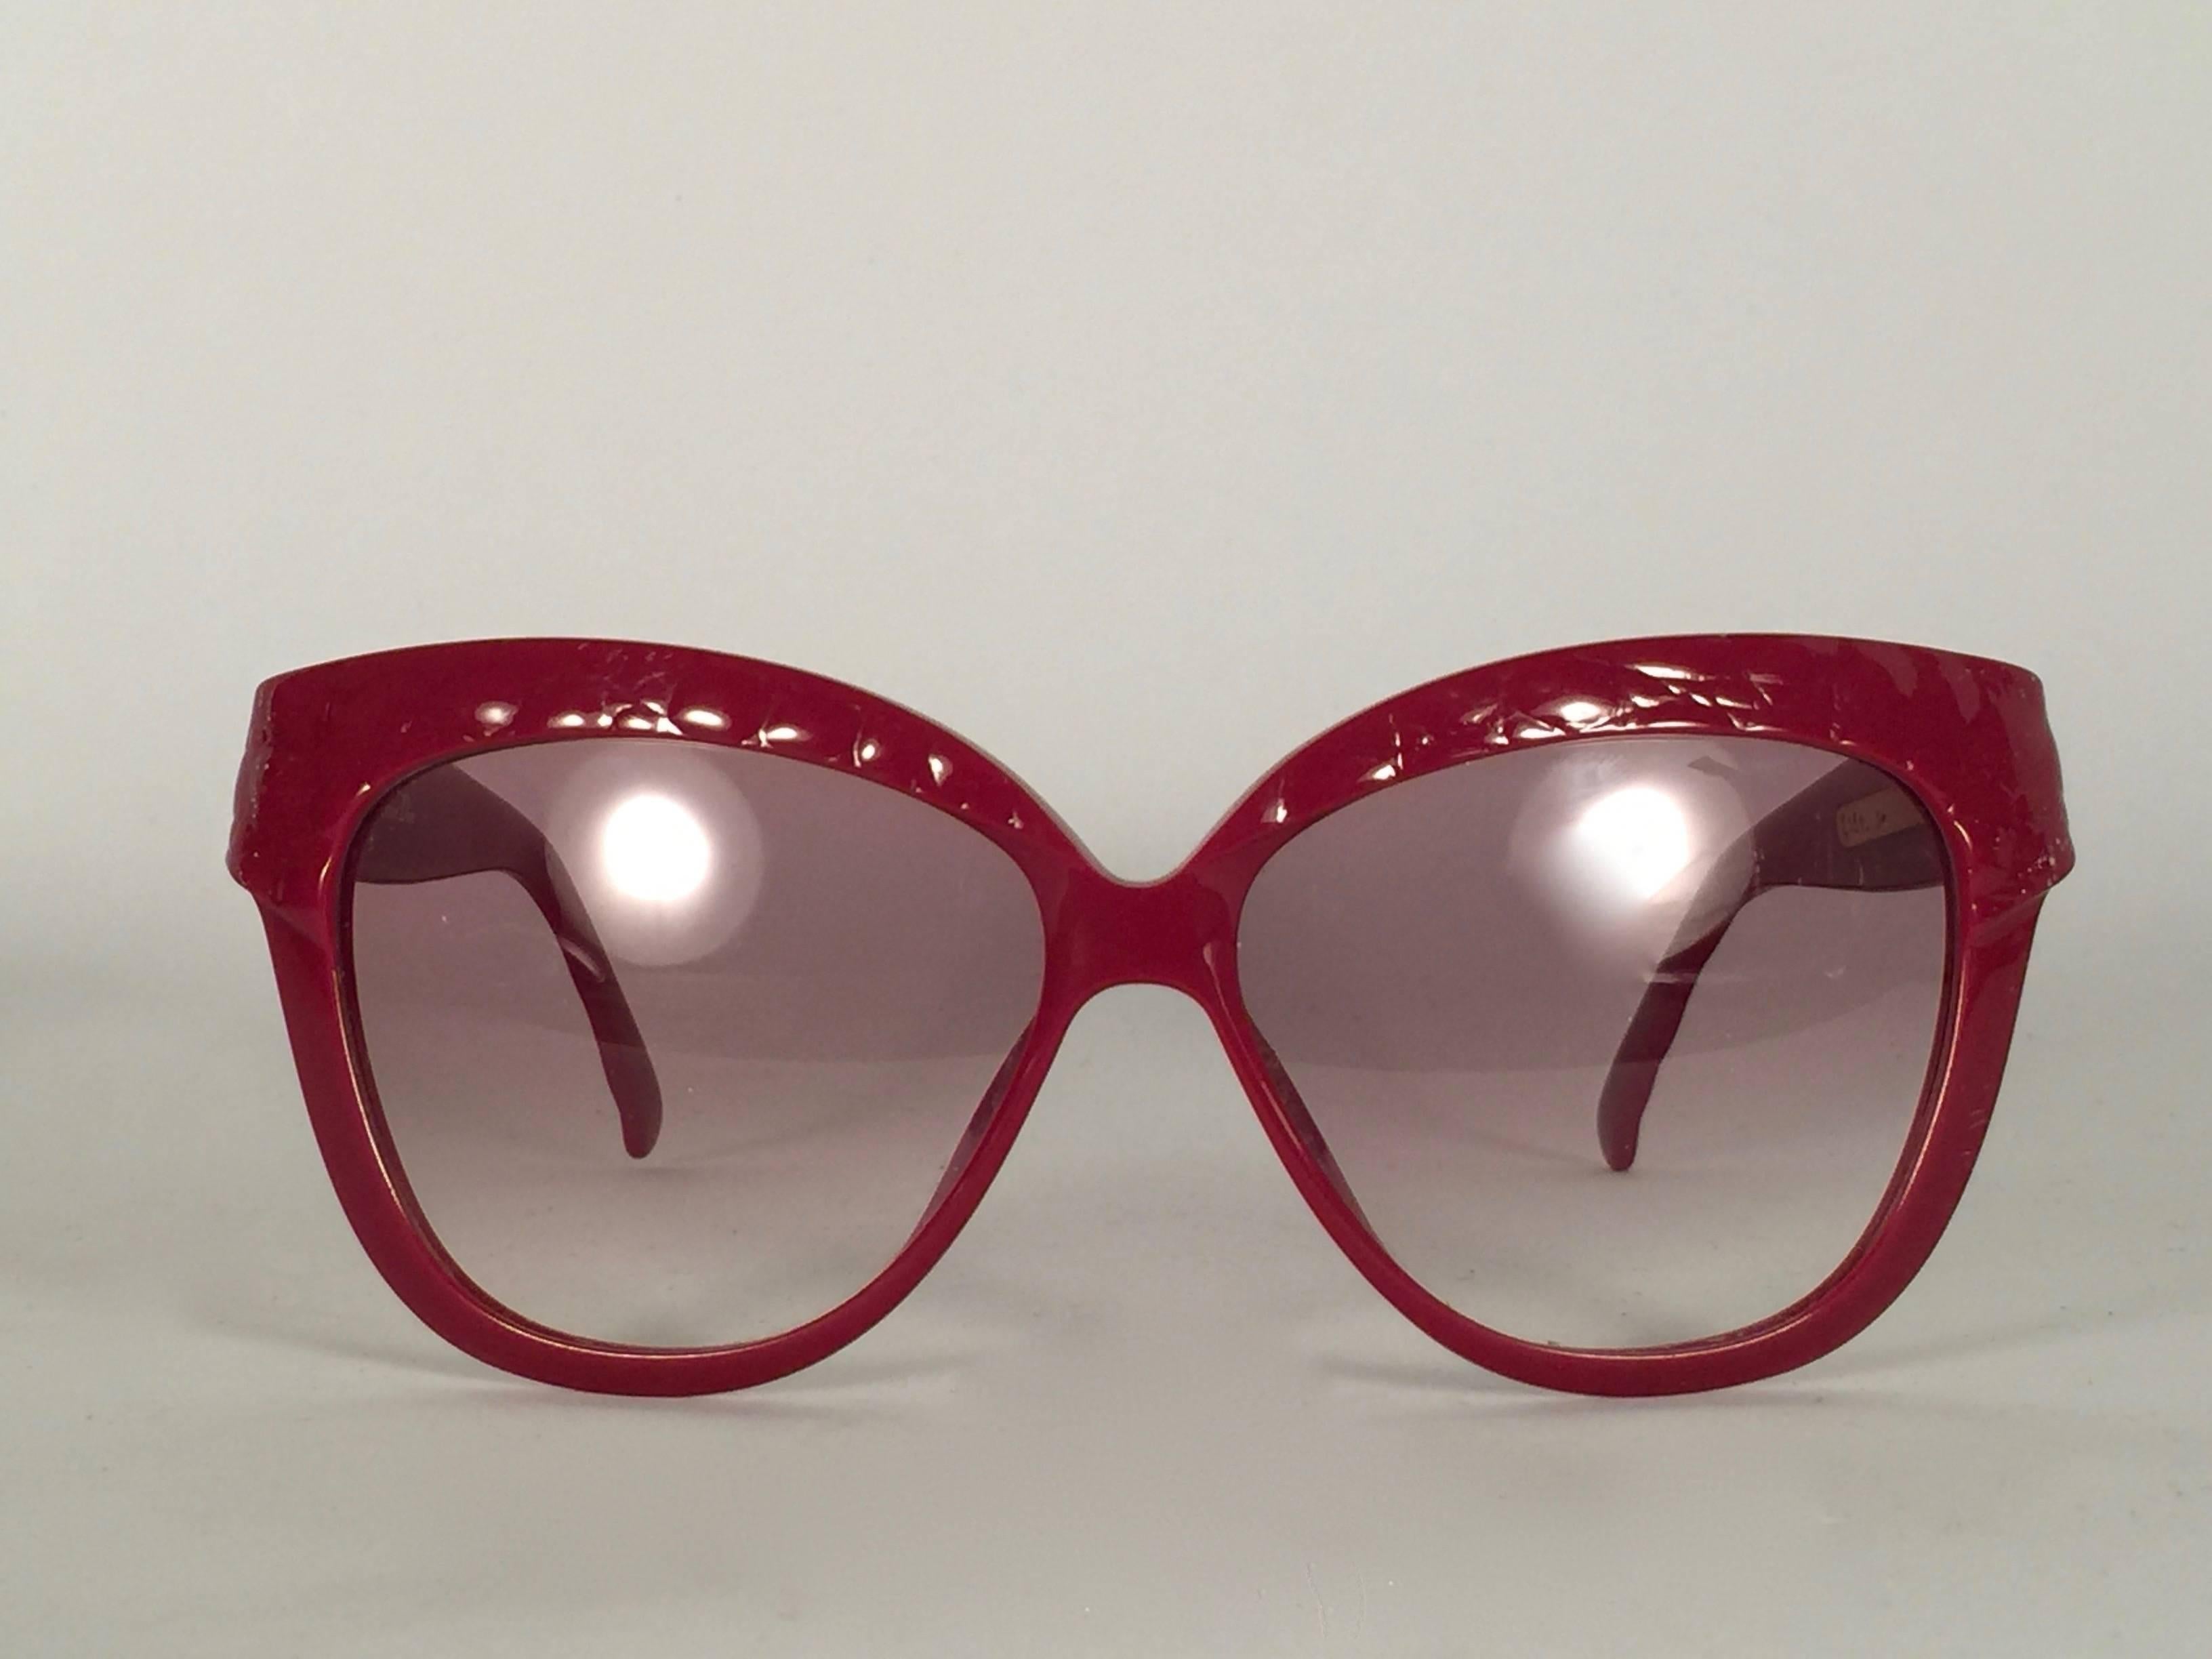 Mint Vintage Christian Dior 2321 quilted red frame with spotless light gradient lenses.   Made in Germany.  Produced and design in 1970's.  This item show minor sign of wear. Comes with its original silver Christian Dior Lunettes sleeve.